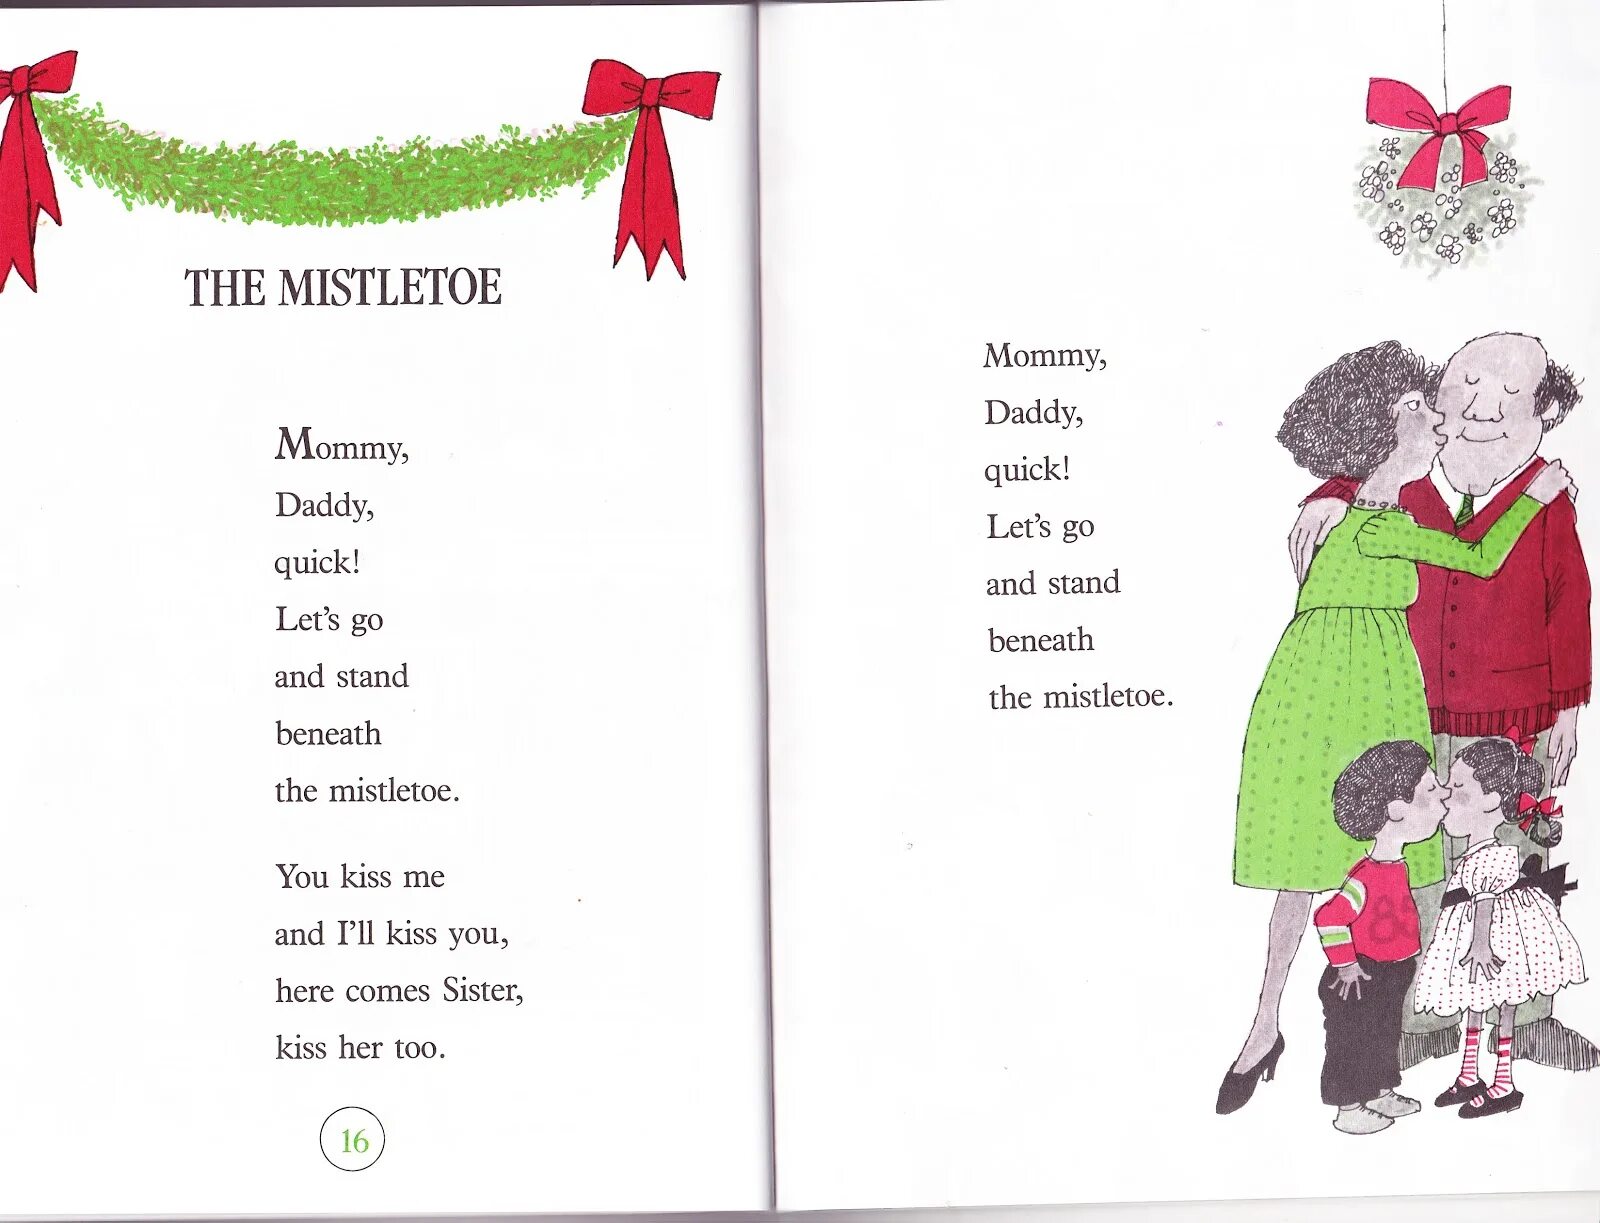 Christmas poems. New year poems for Kids. Christmas poems for Kids. Poems in English about Christmas. Short poems